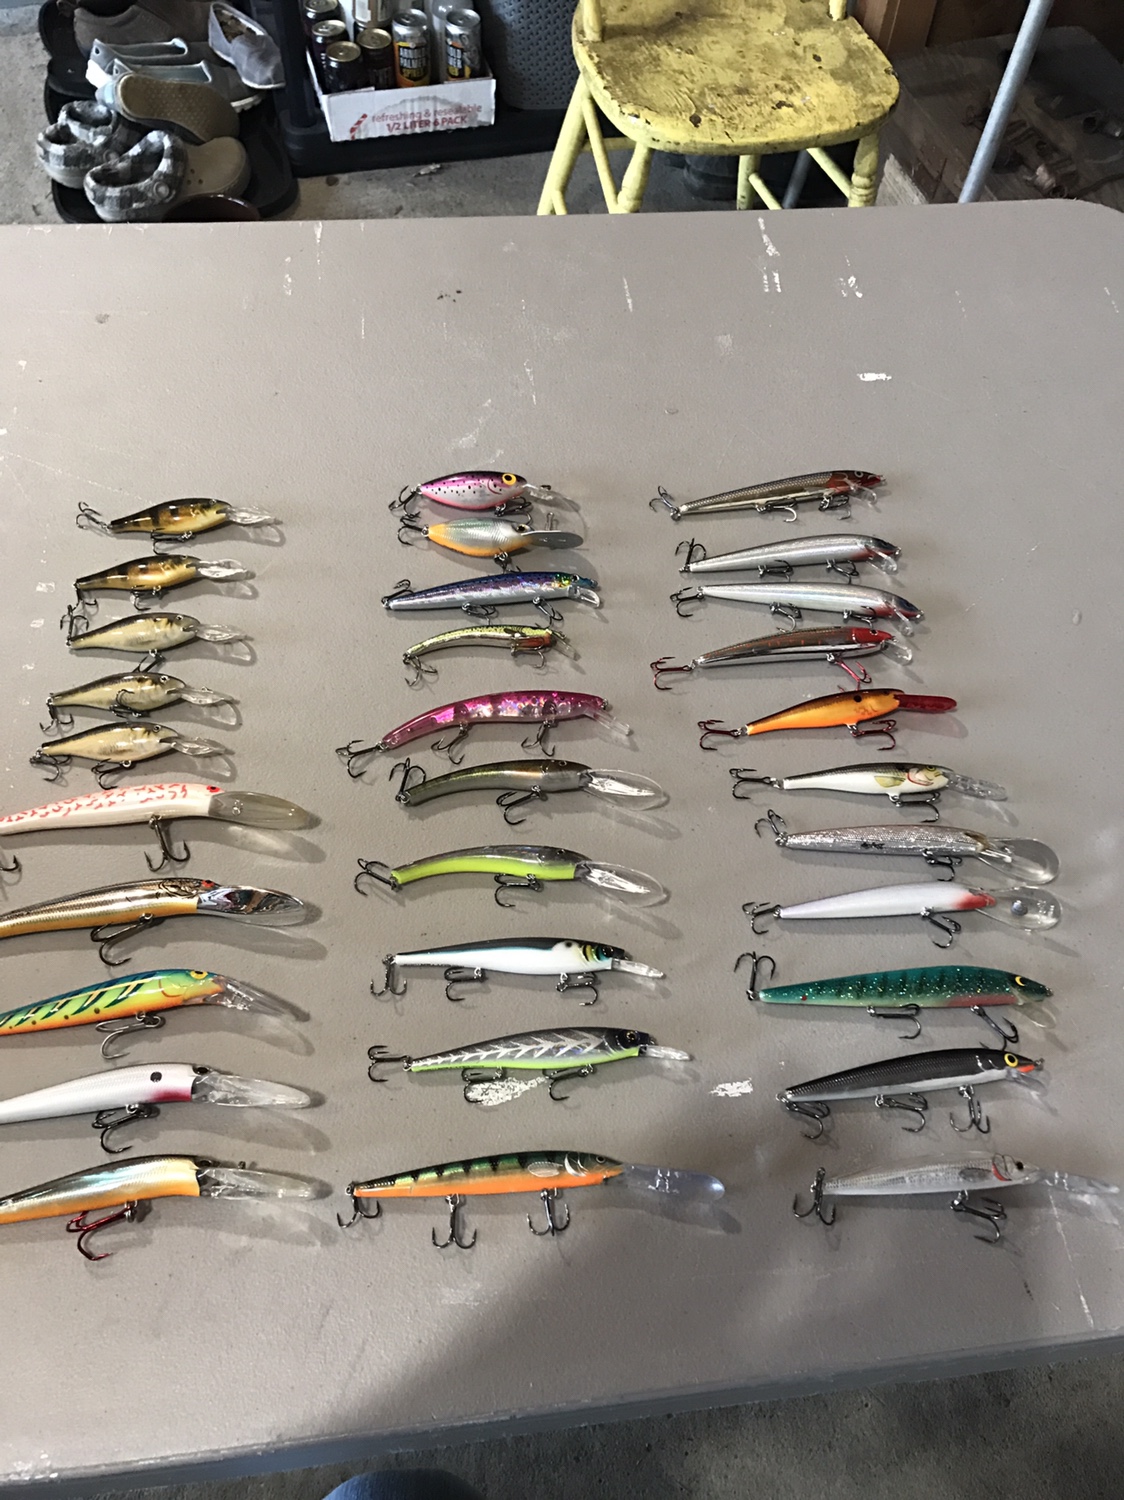 Walleye lure lot of 31 lures - Classifieds - Buy, Sell, Trade or